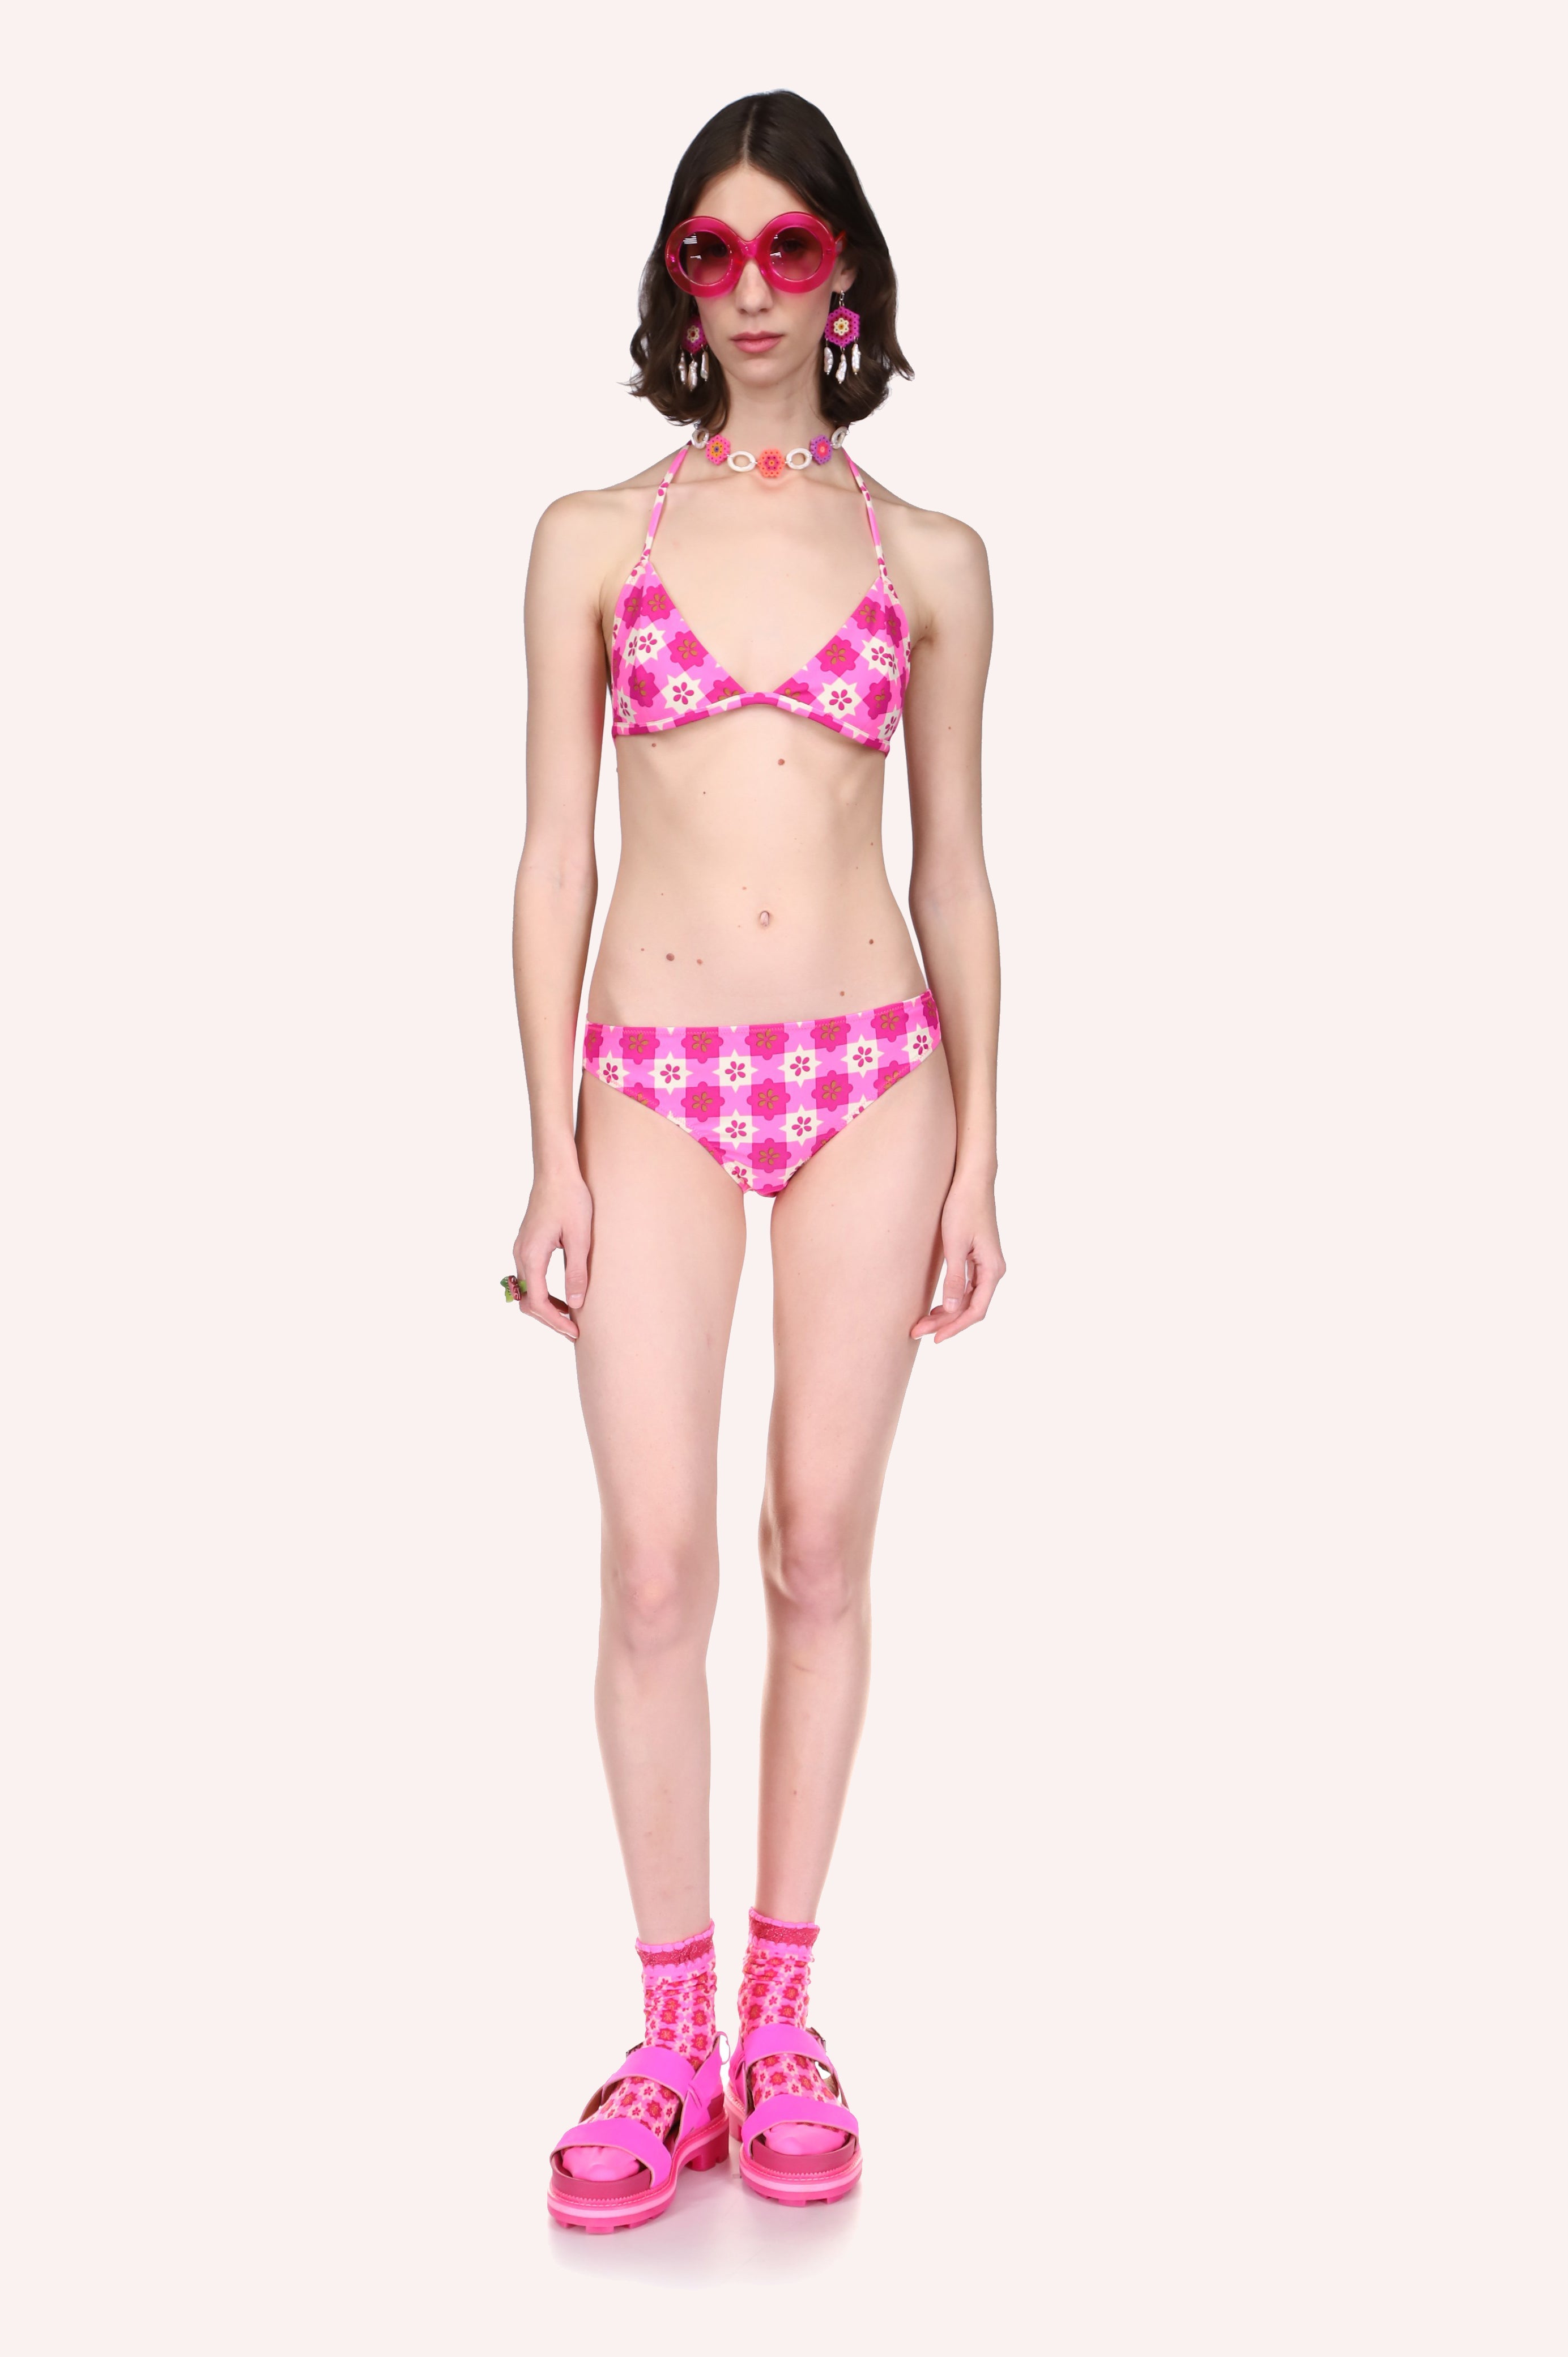 Utopian Gingham Triangle Bikini Set Neon Pink features a pink and white star-shaped pattern.